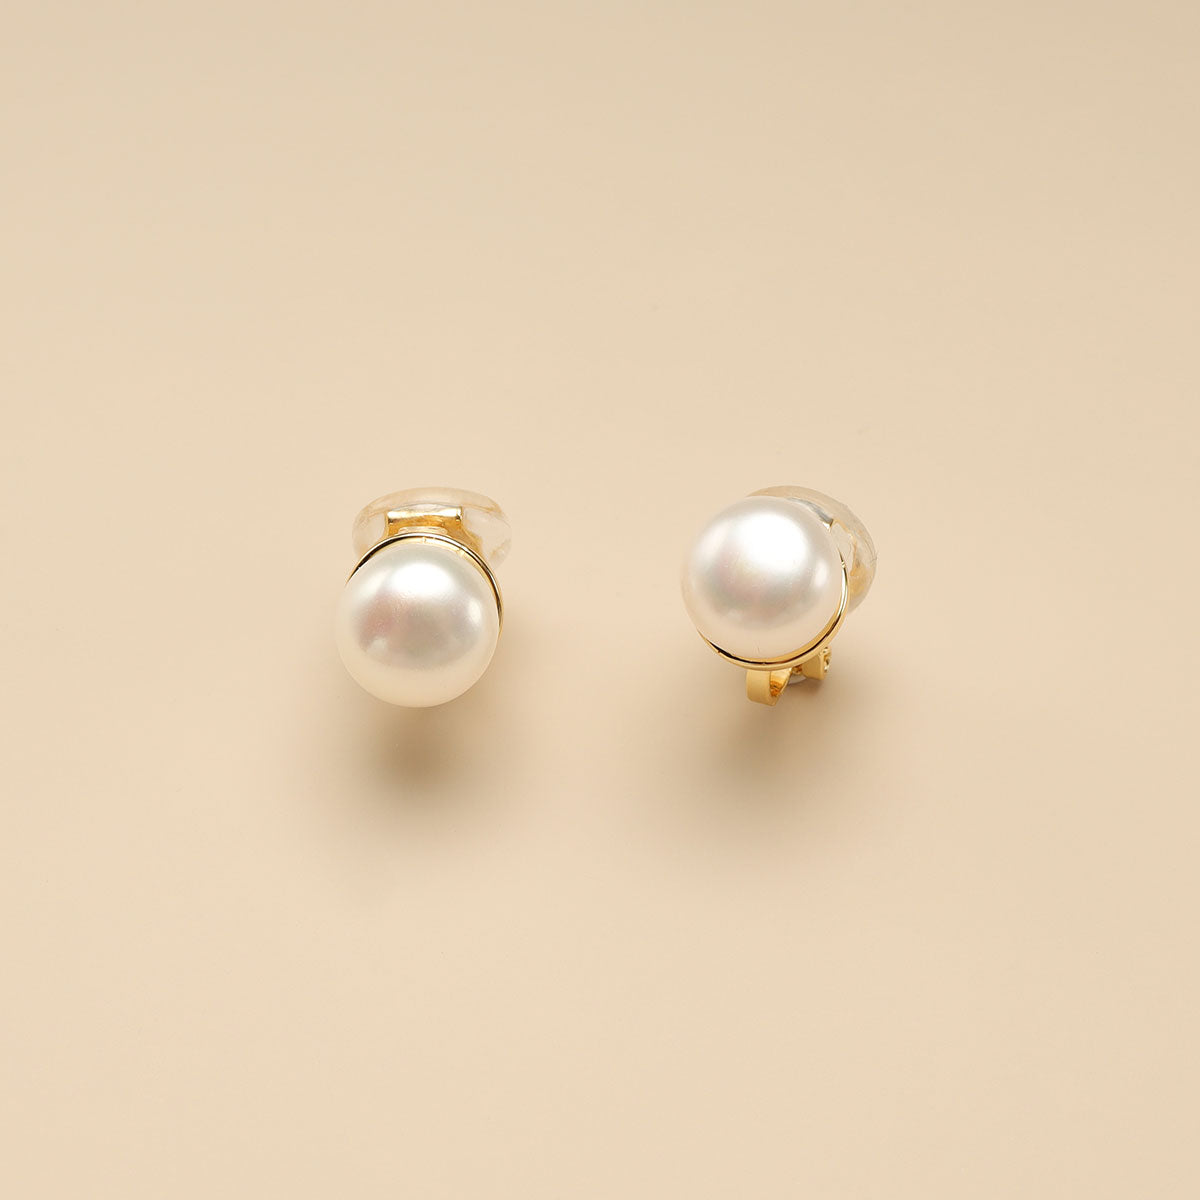 Small clip on pearl earrings.